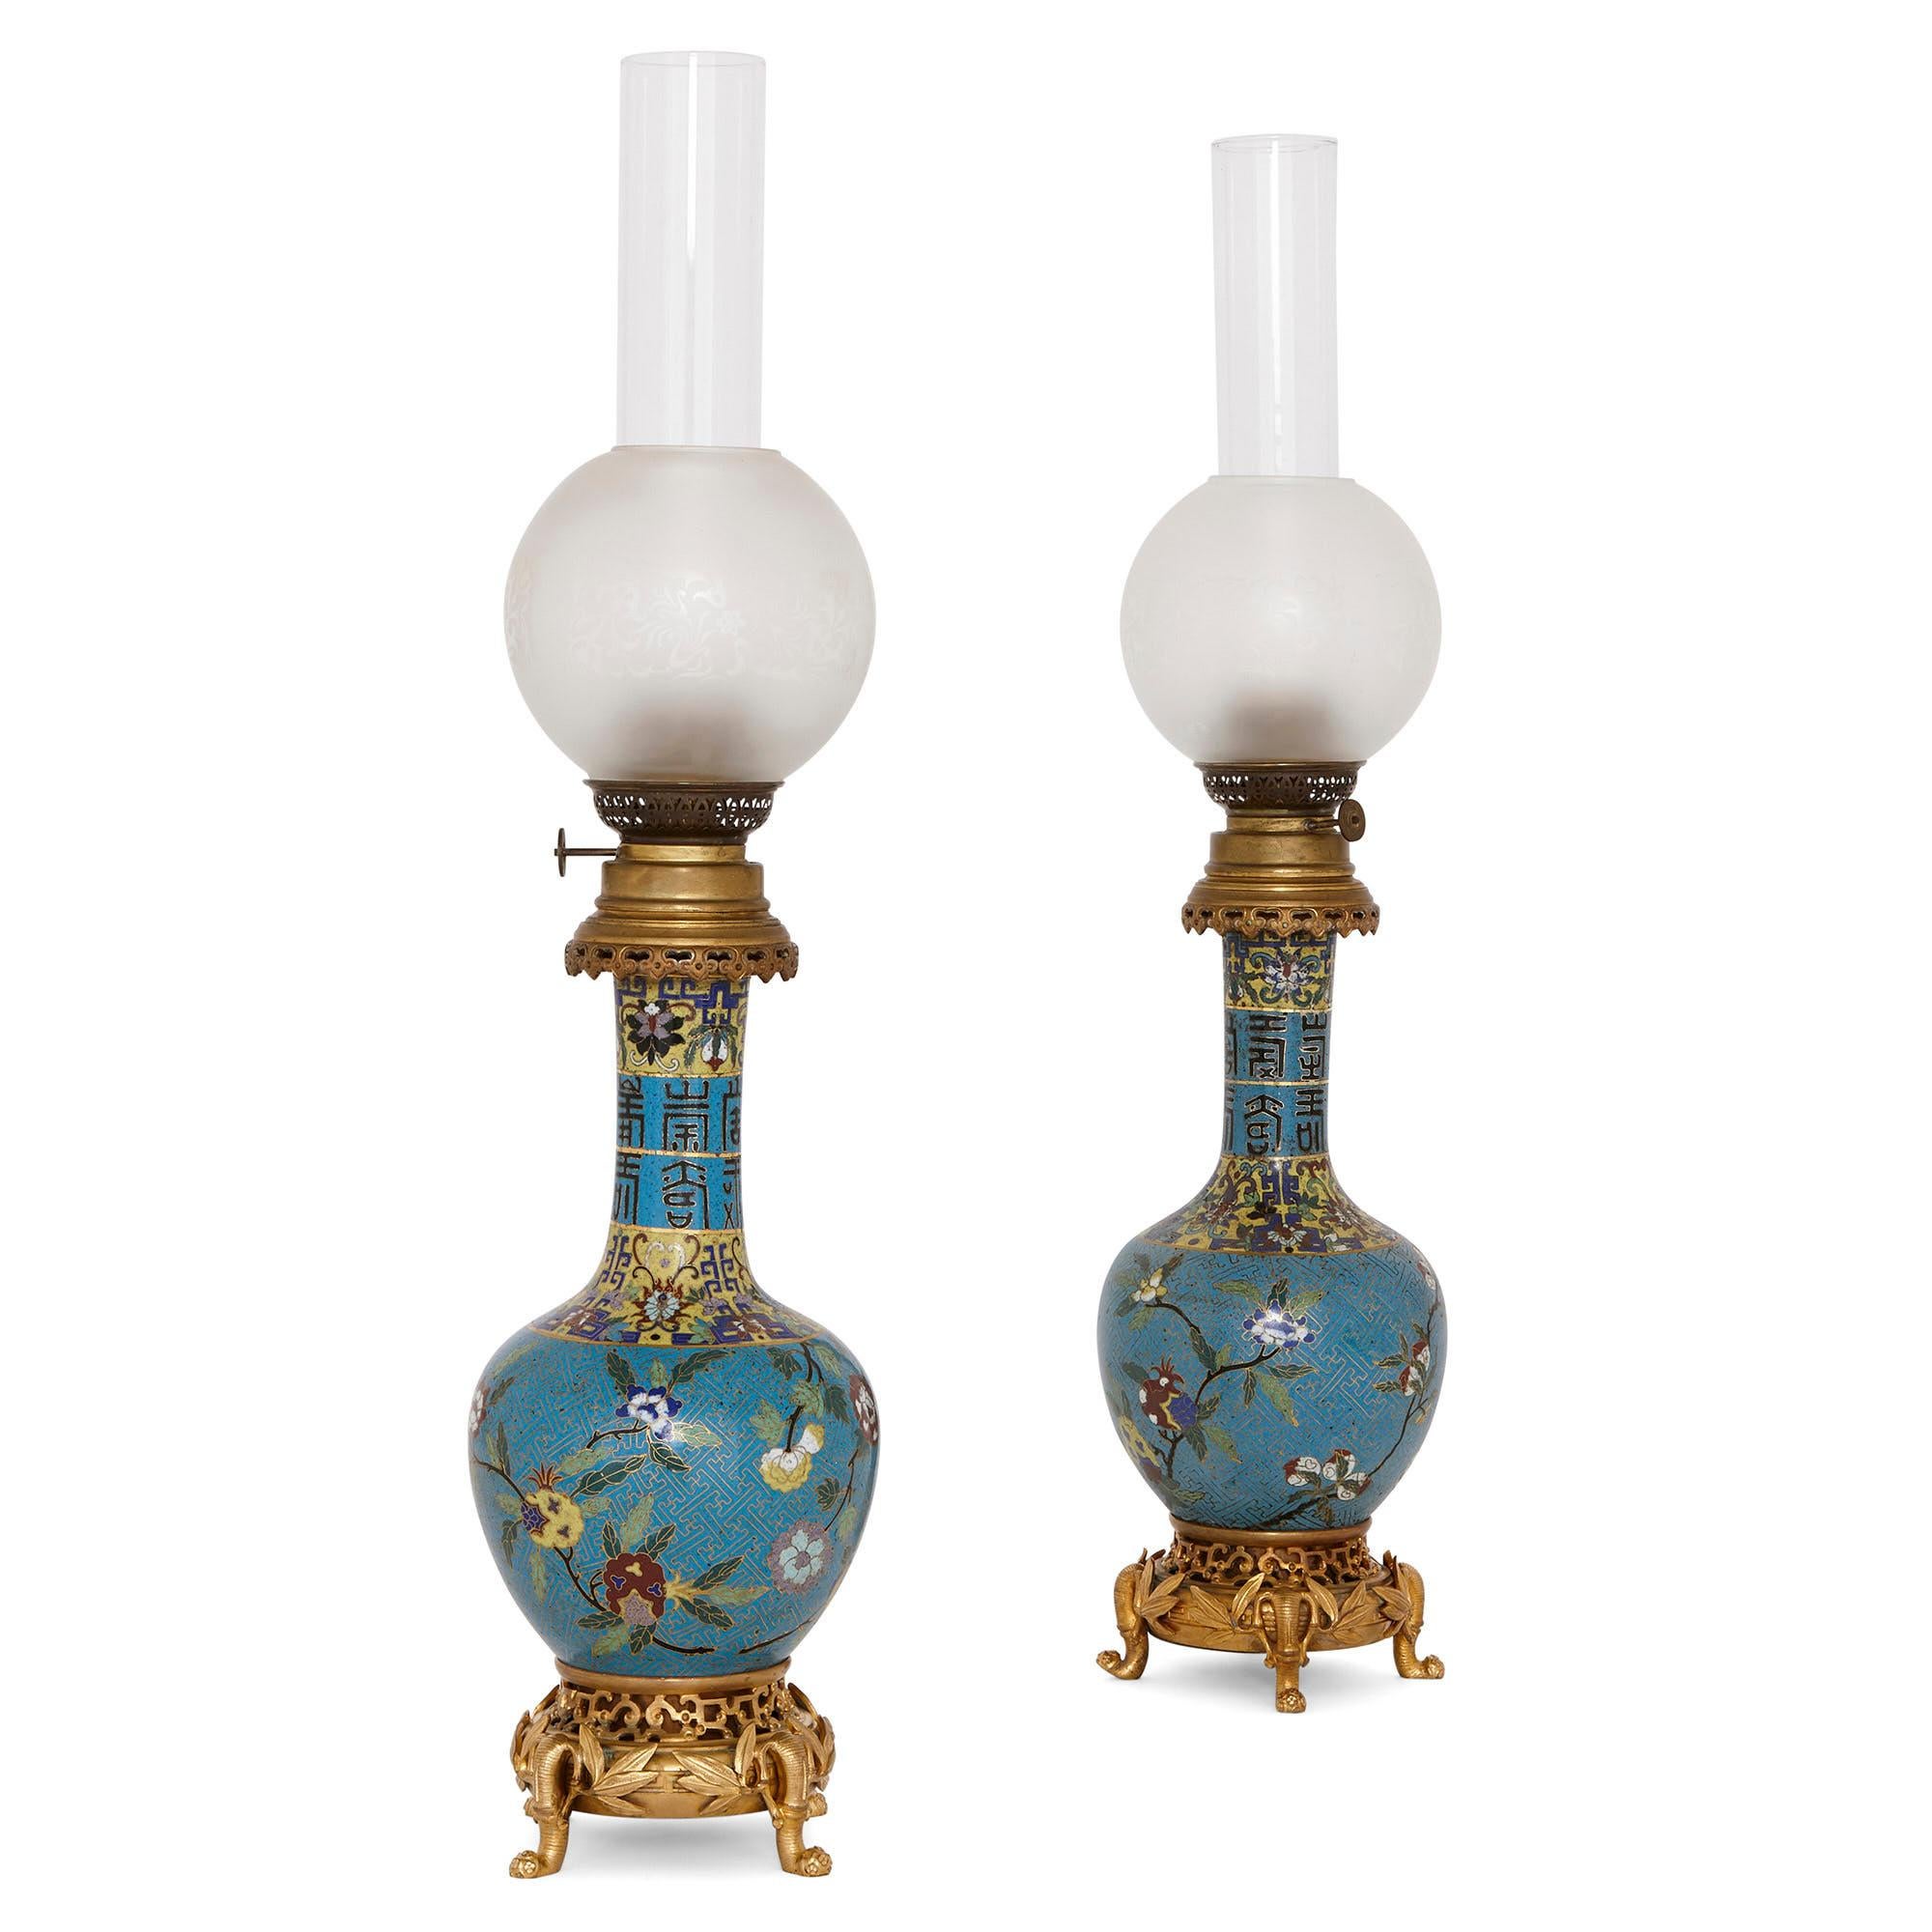 These beautiful oil lamps were created in France in the late 19th century. They are designed in a wonderful chinoiserie style—a European take on Chinese decorative arts. 

The lamps are identical in design. Each lamp features a burner which is